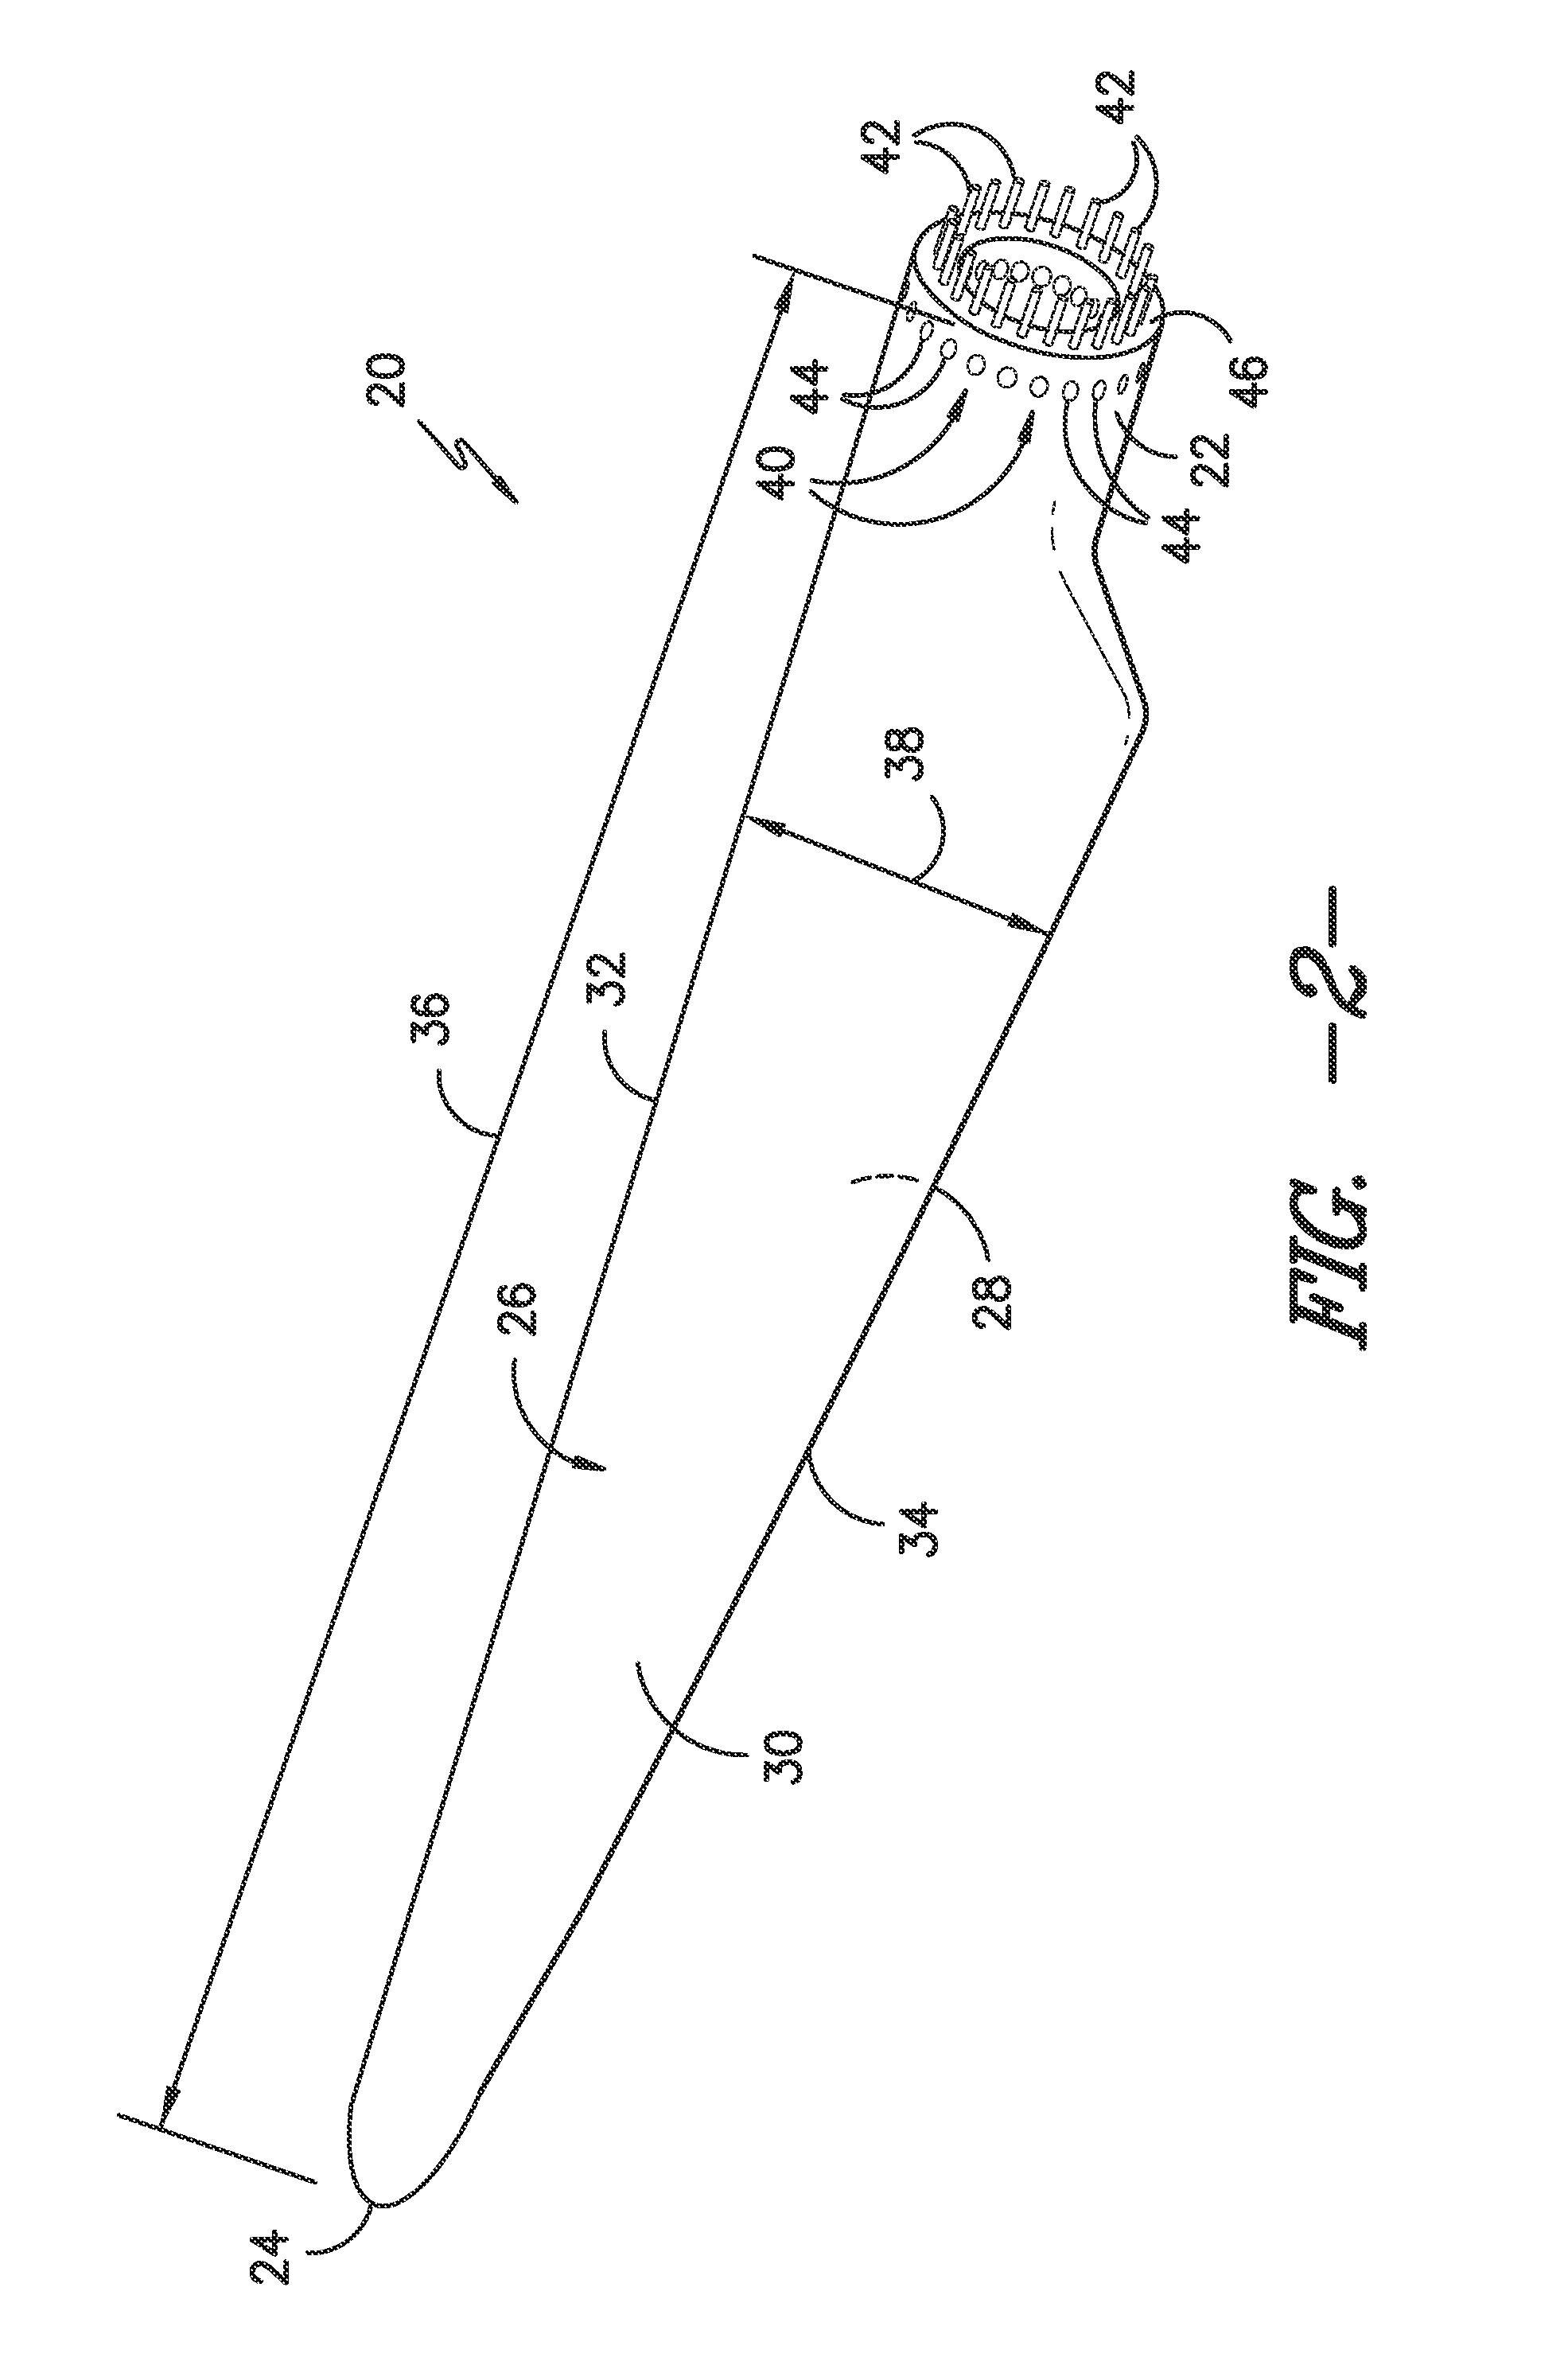 Pitch bearing assembly with stiffener